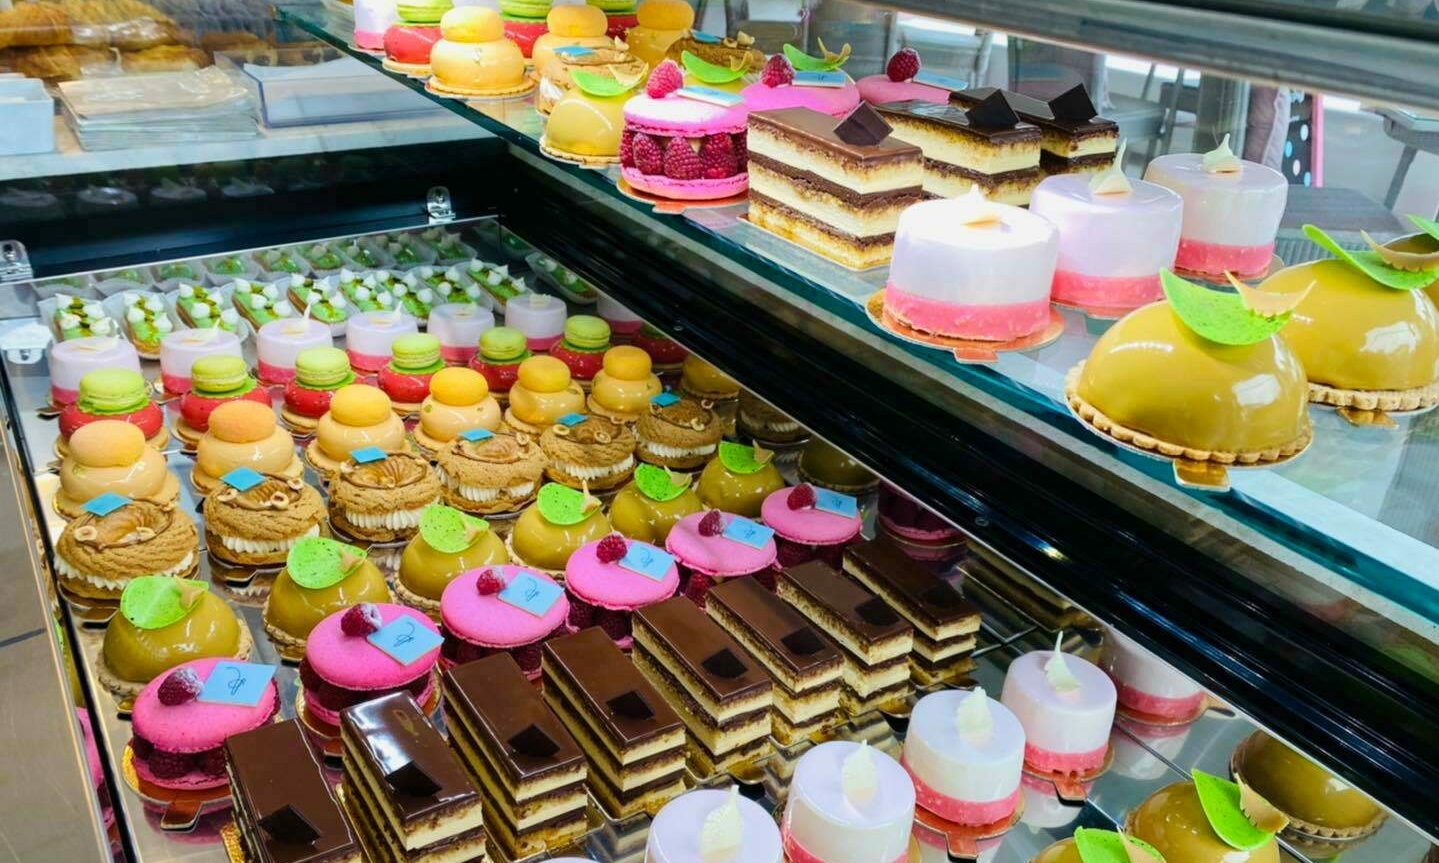 French patisserie from Almondine.